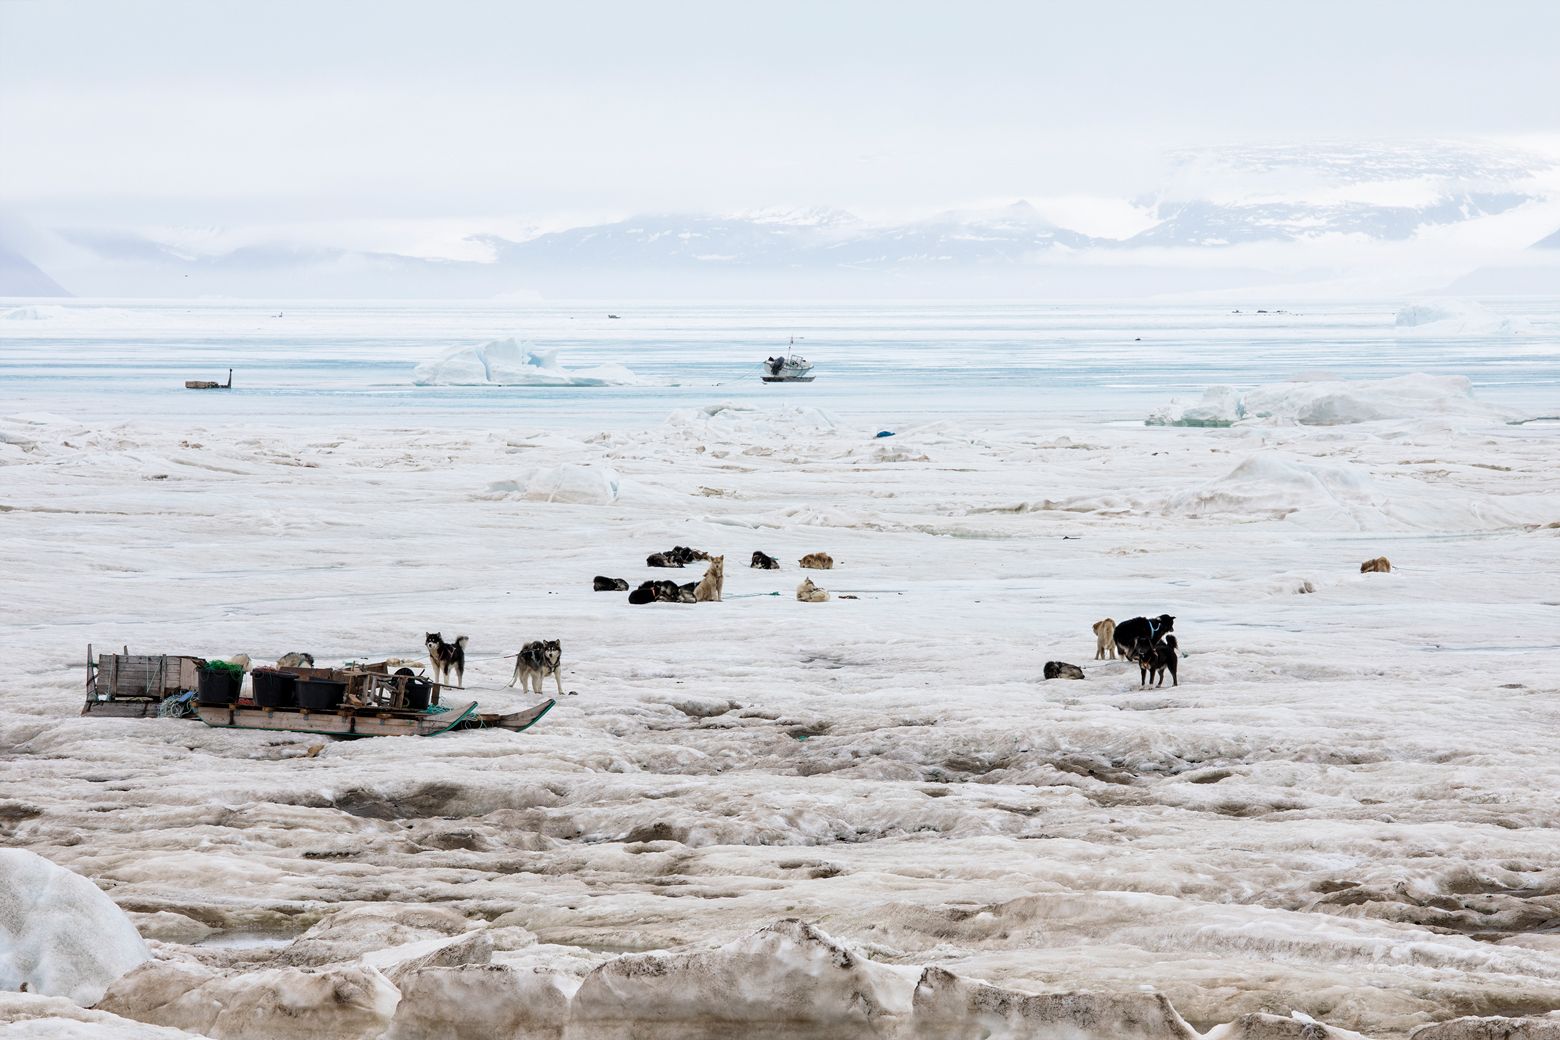 Imports arrive only twice a year, and Qaanaaq is the one of the last towns in Greenland where people survive by hunting on sea ice – which is rapidly disappearing. Image by Anna Filipova. Greenland, 2018.
